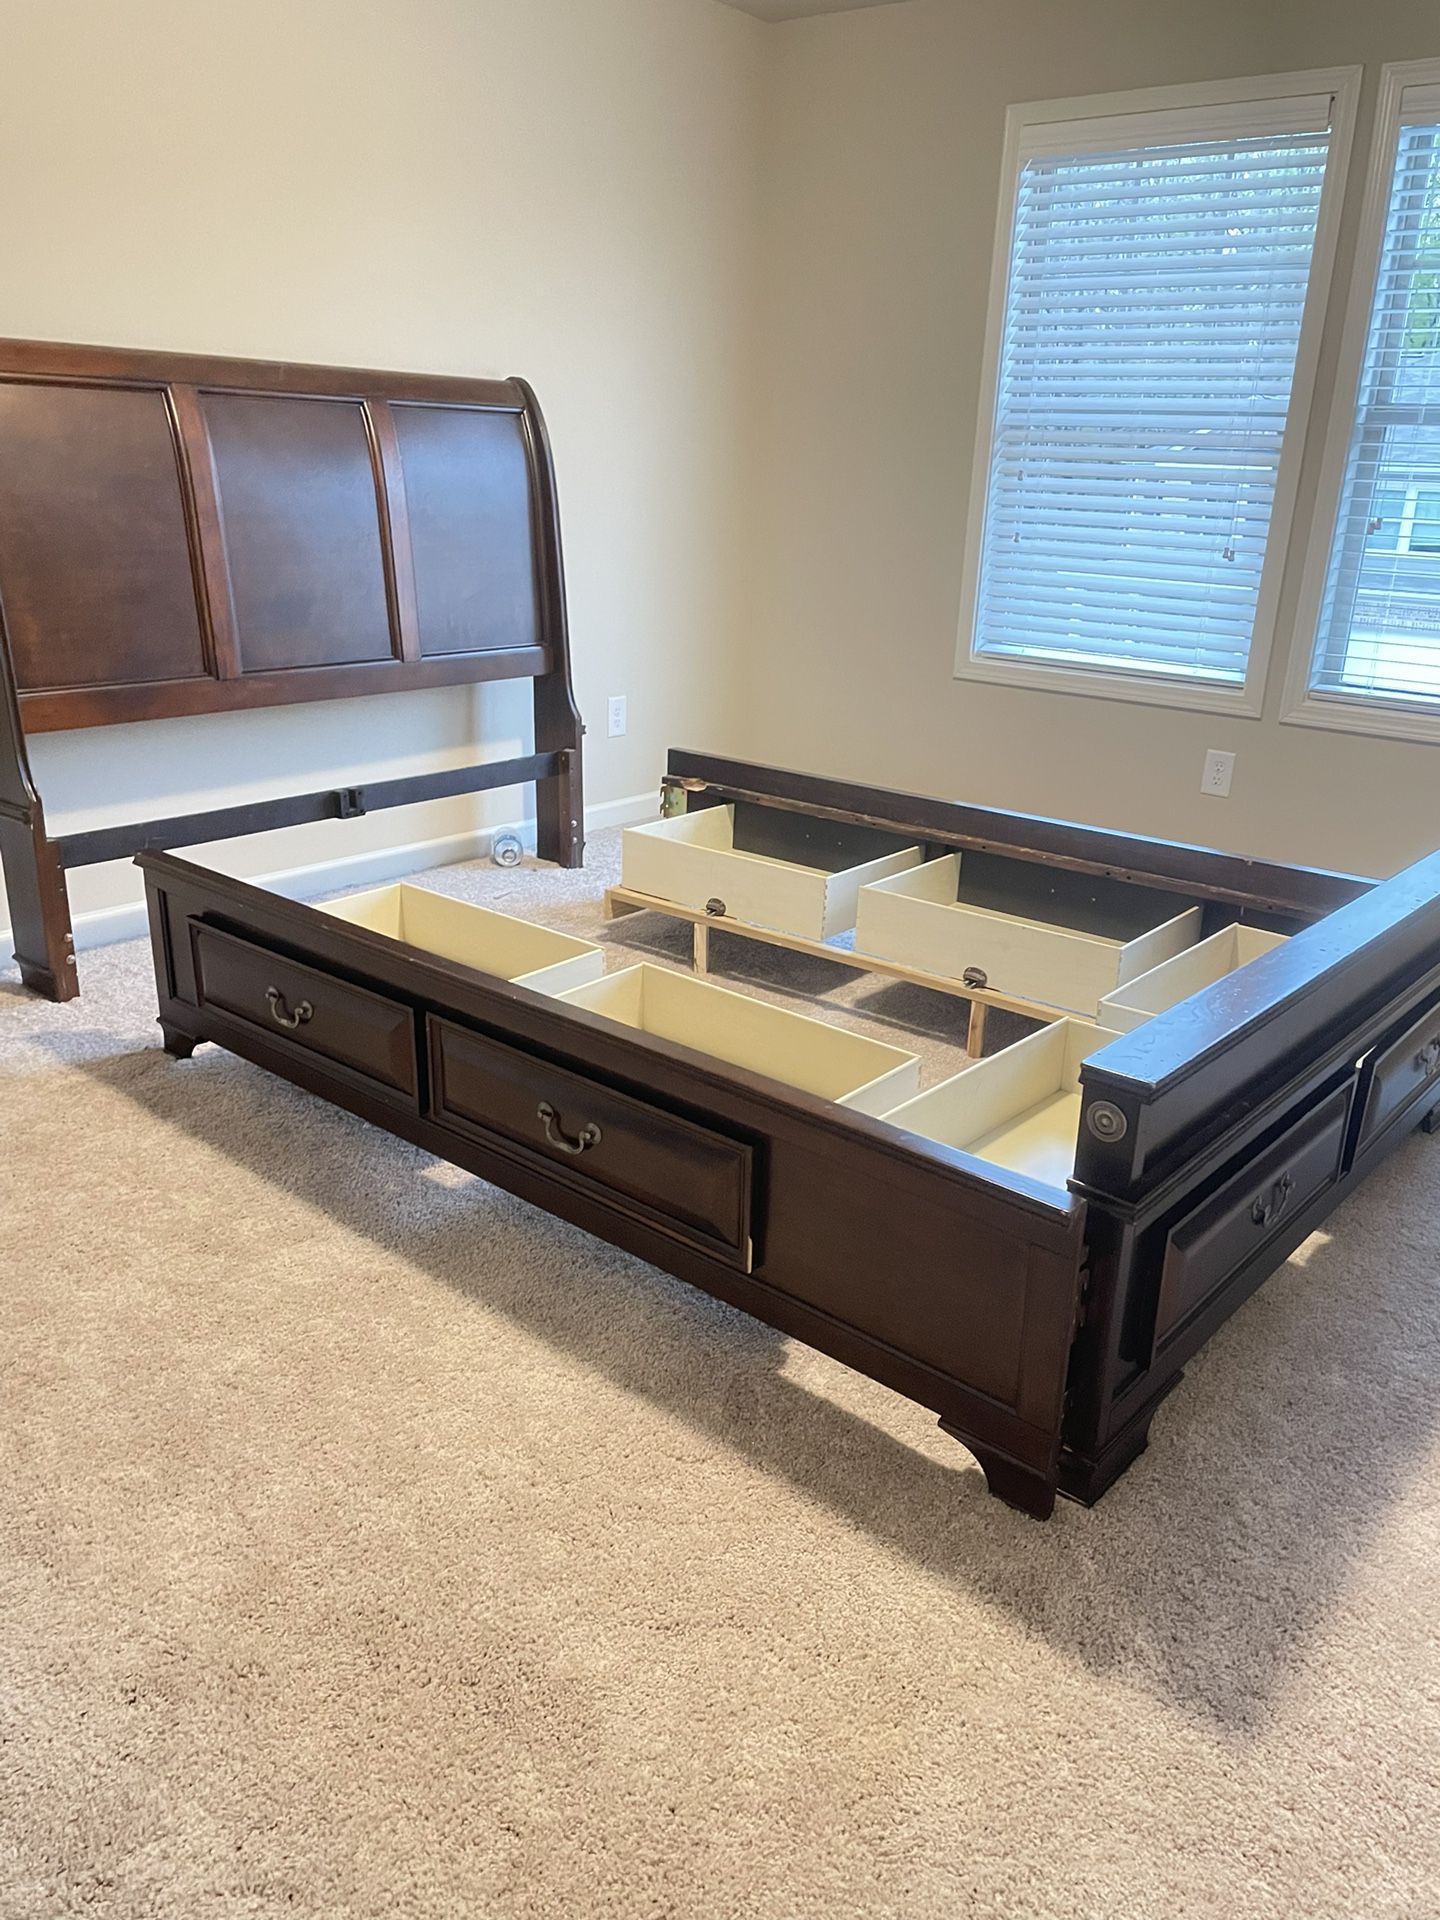 Queen size Sleigh bed, Cherry finish, storage bed & bed frame with wooden slats and bottom board